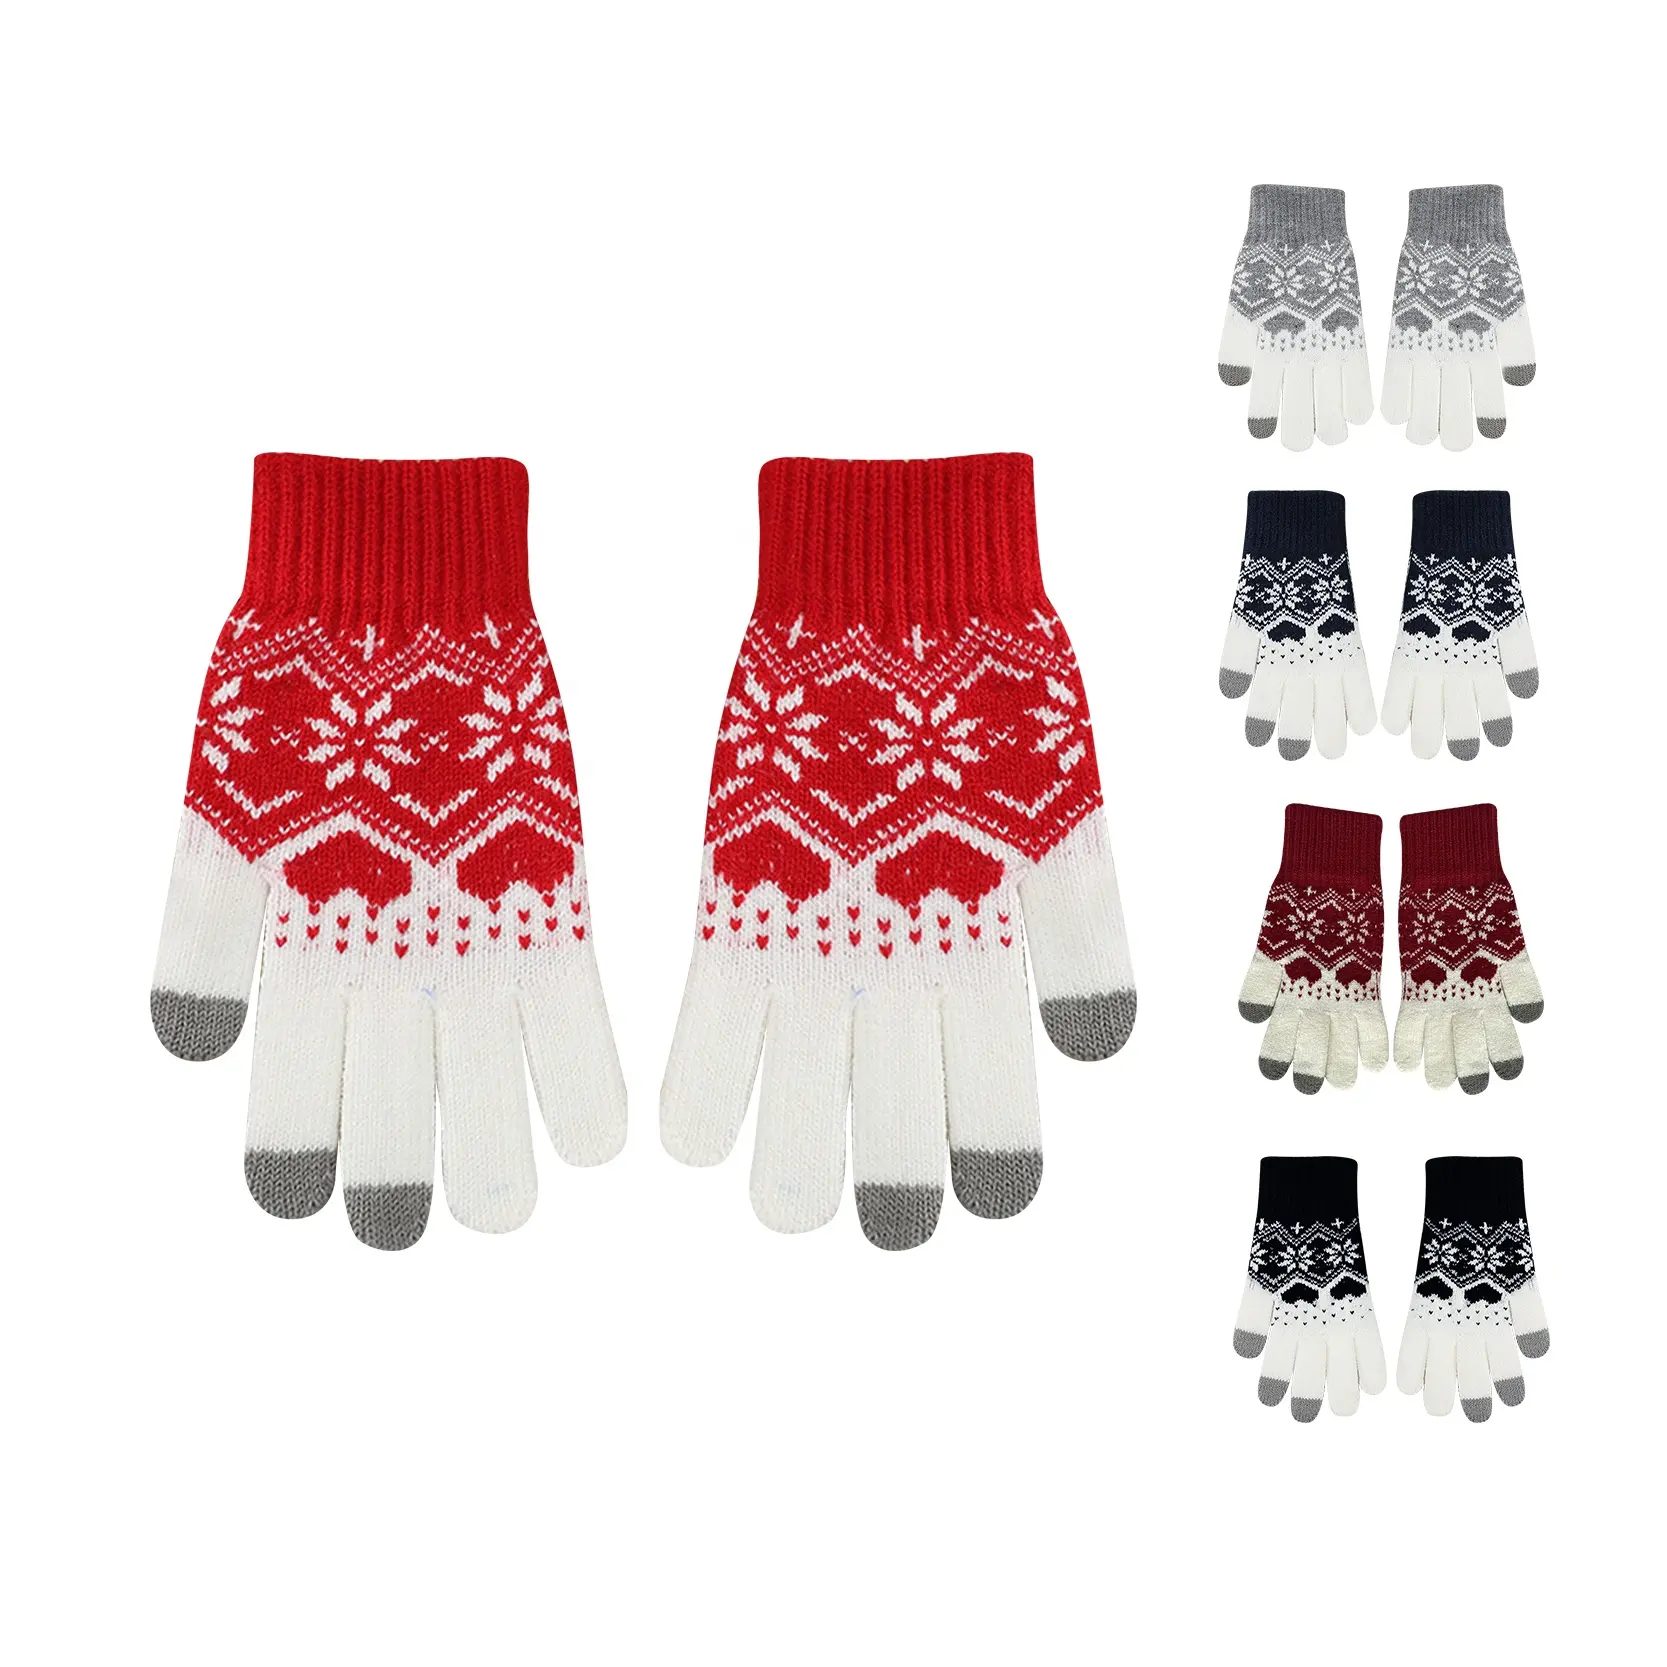 Cheap Winter Gloves Guantes De Invierno Winter Warm Custom Christmas New Year Gift Knitted Gloves